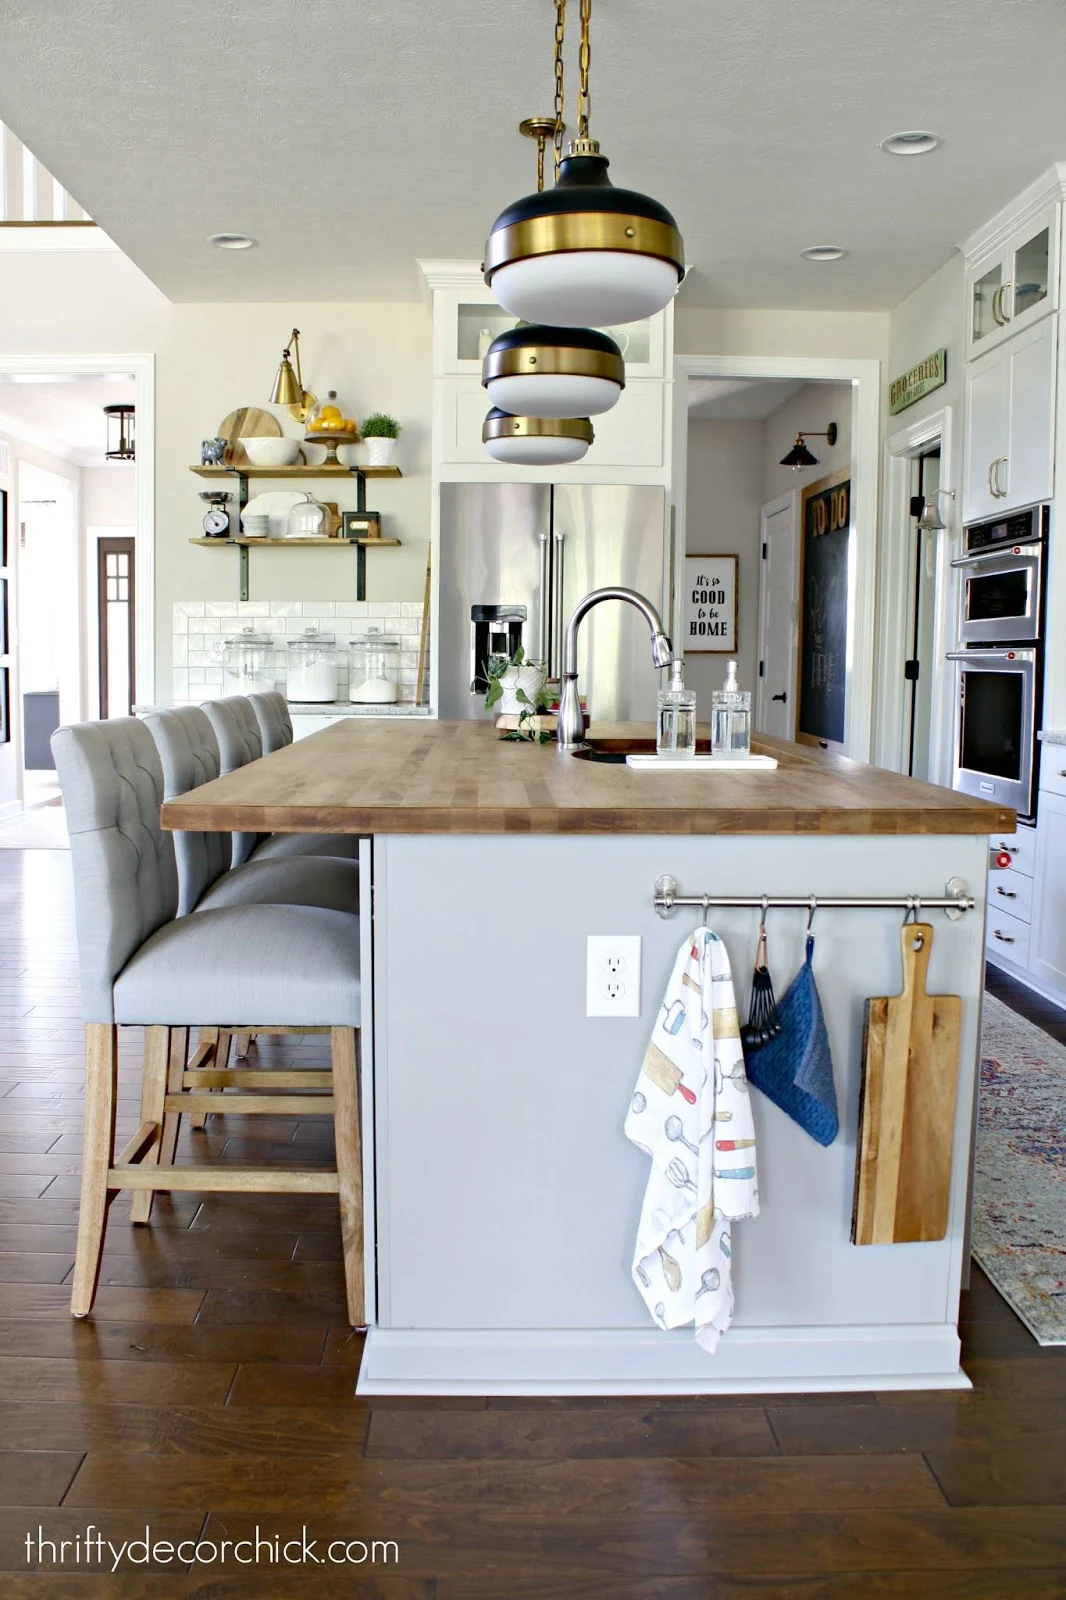 How to add character to plain kitchen island 